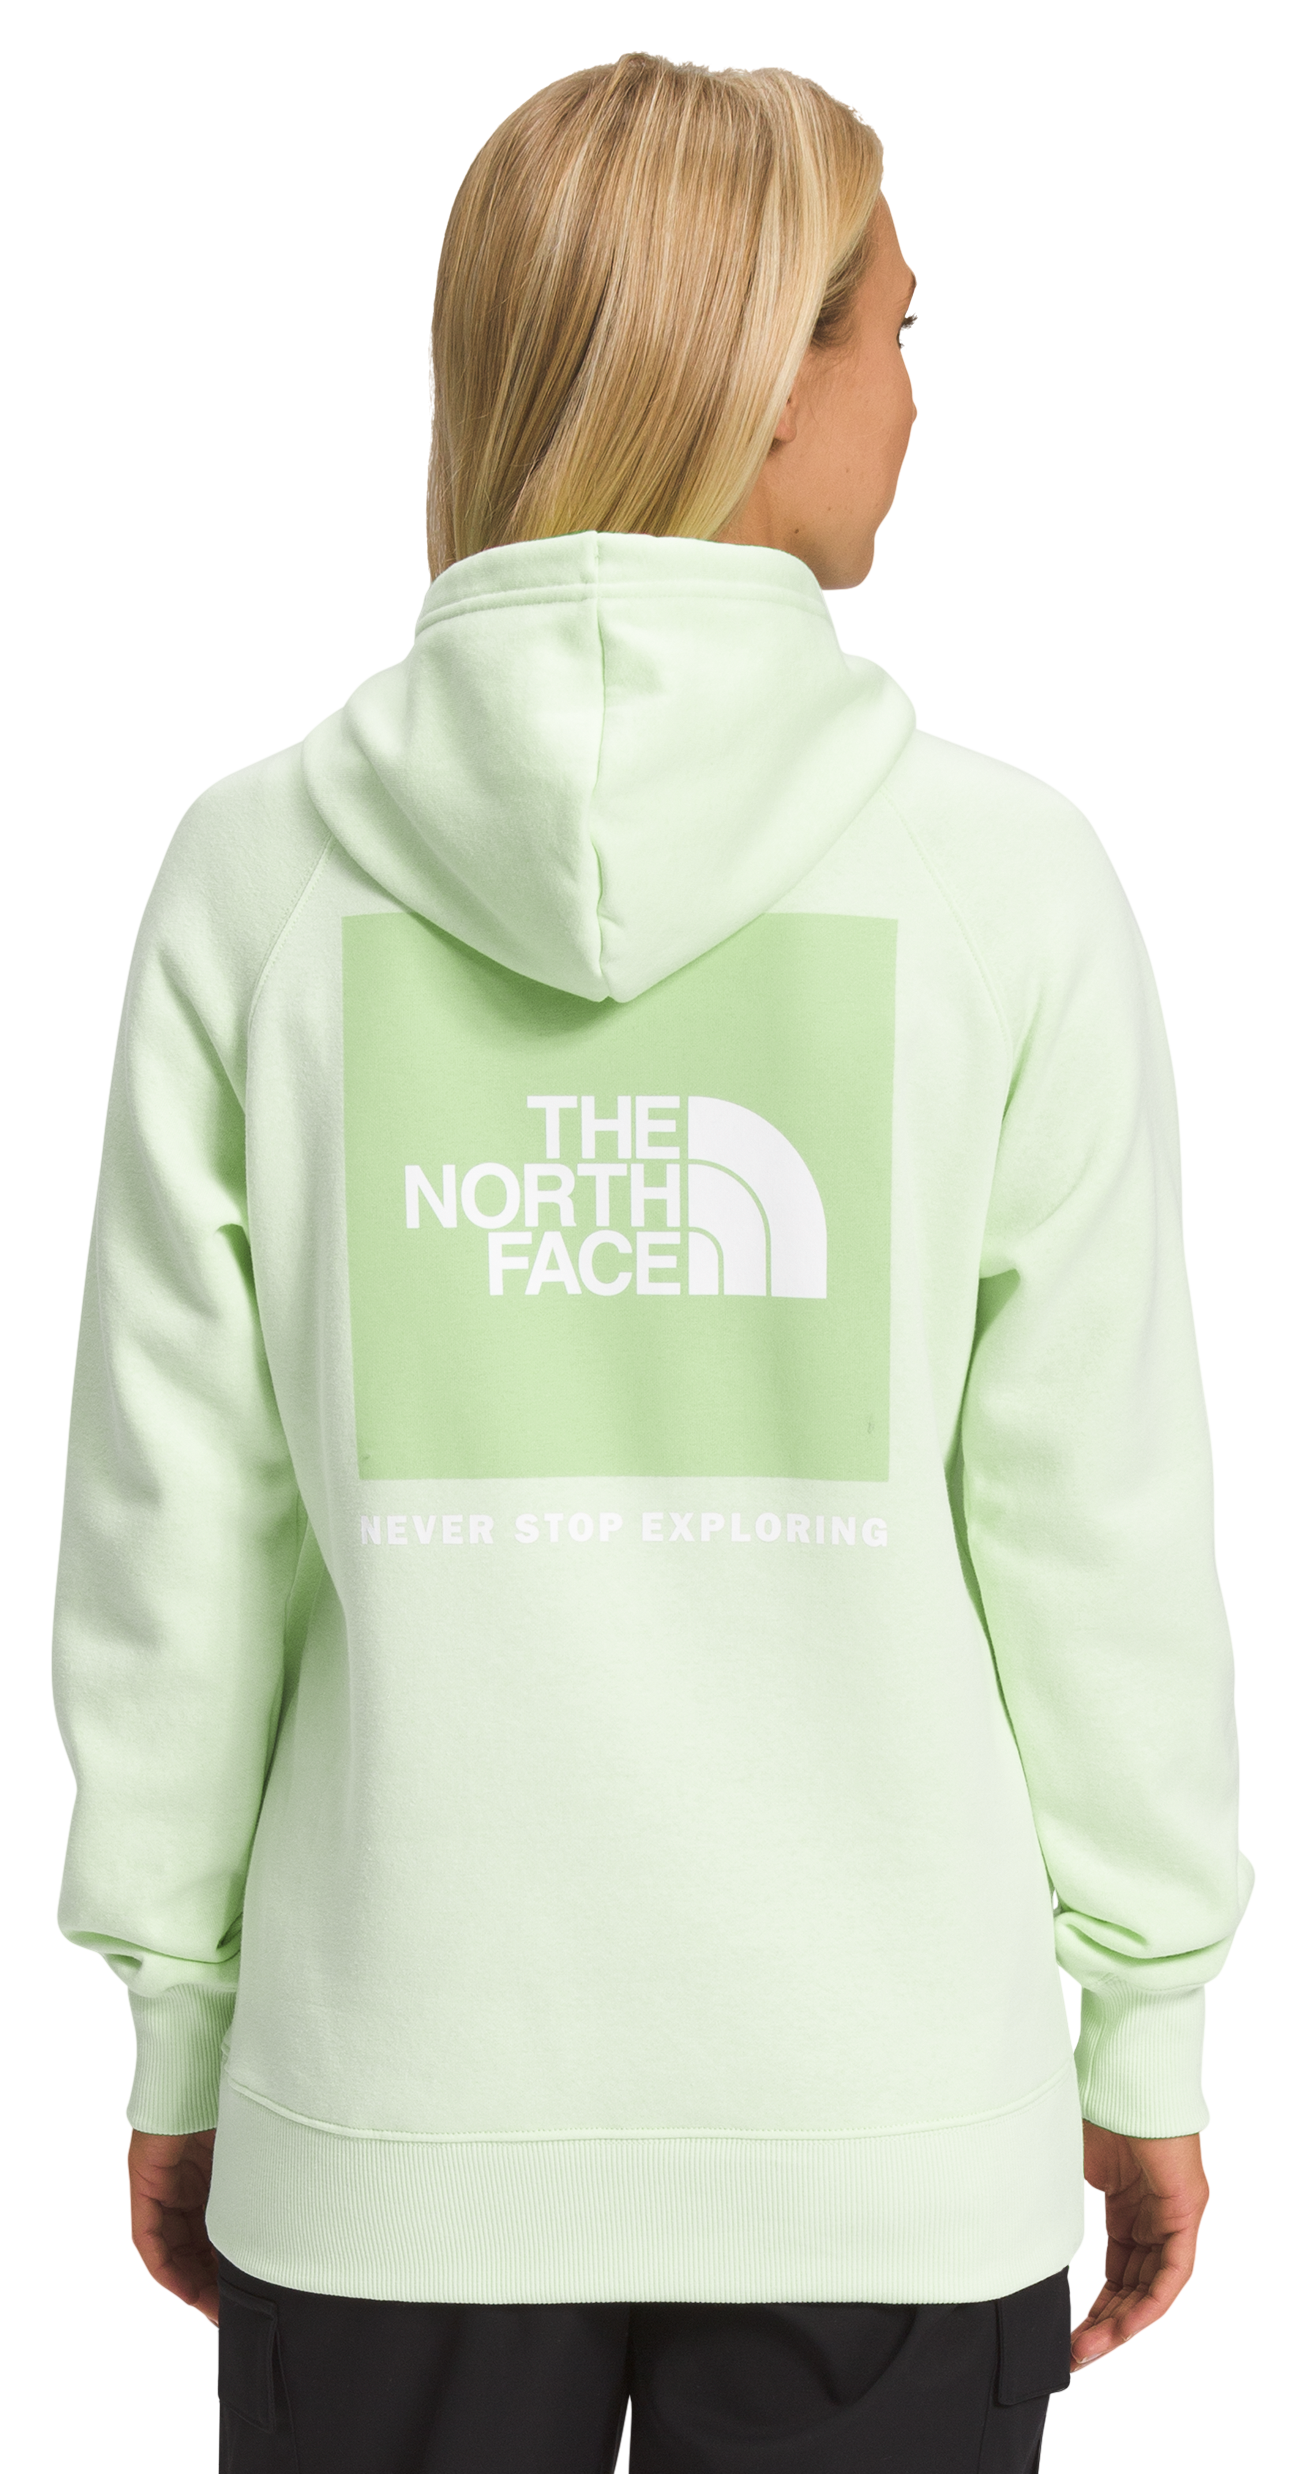 The North Face Box NSE Long-Sleeve Hoodie for Ladies - Lime Cream/Lime Cream - XL